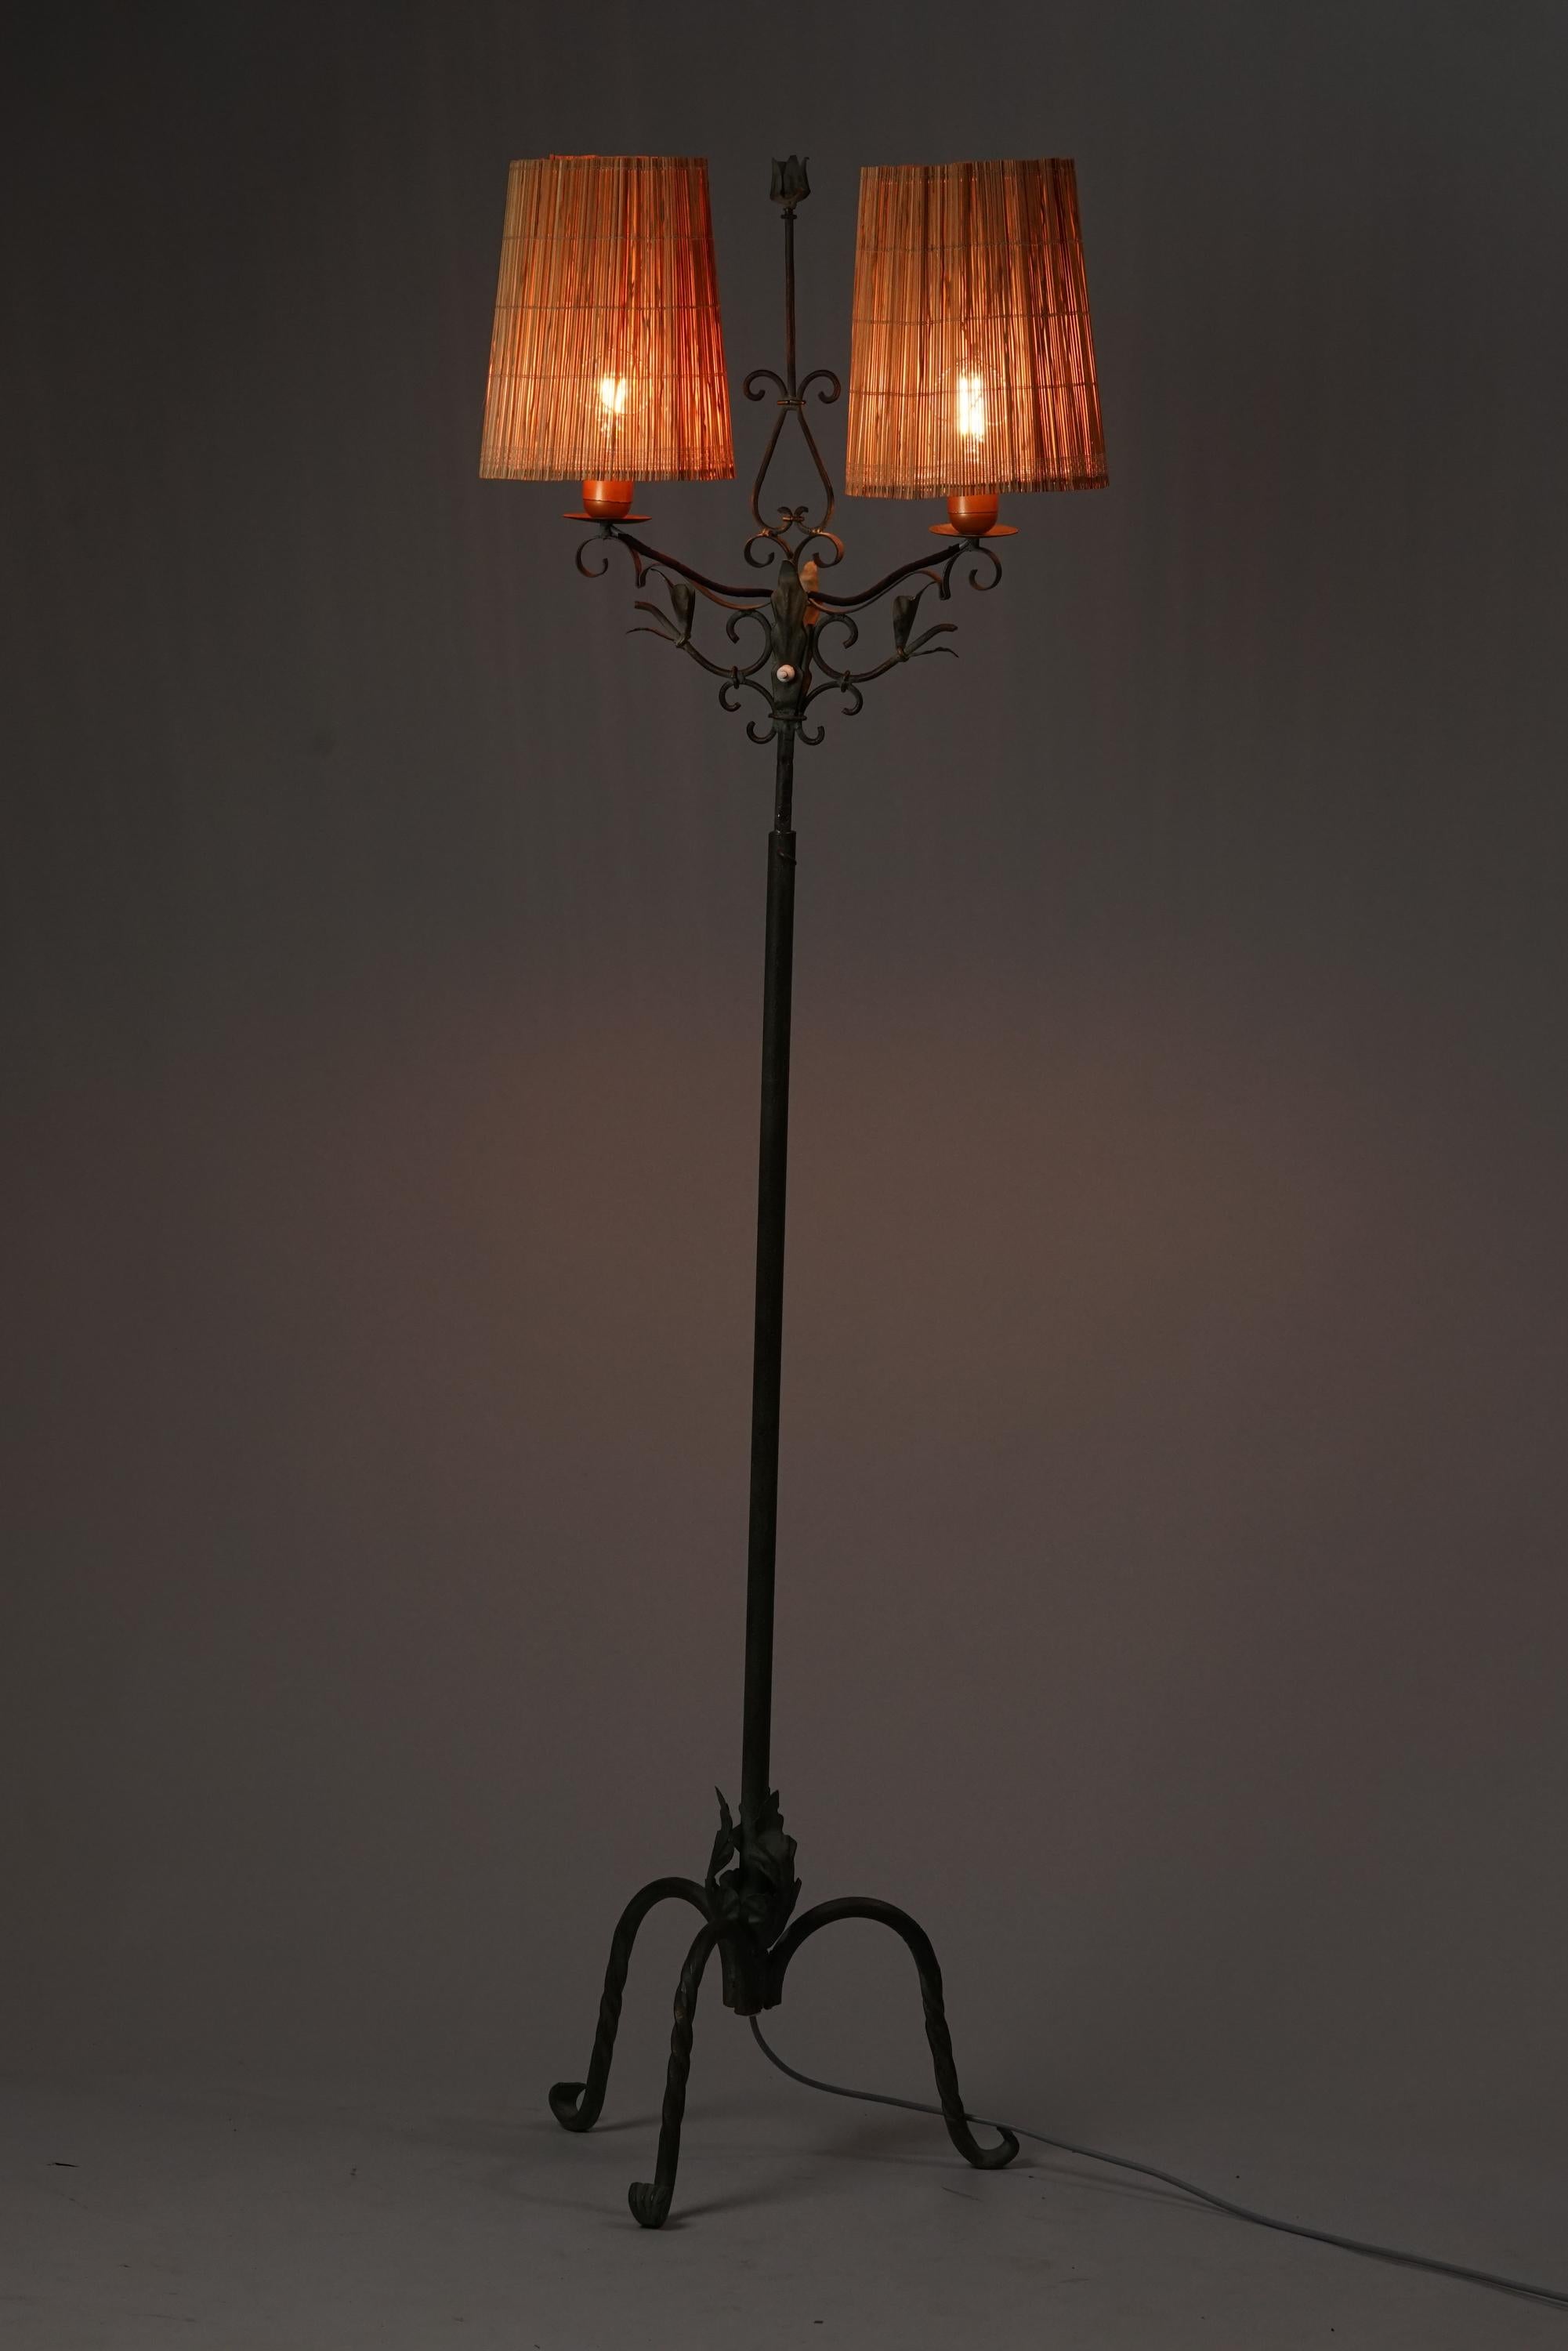 Forged iron floor lamp, manufactured by Taidetakomo Hakkarainen, early 20th century. New handmade rattan lampshades. Good vintage condition, minor patina consistent with age and use. 